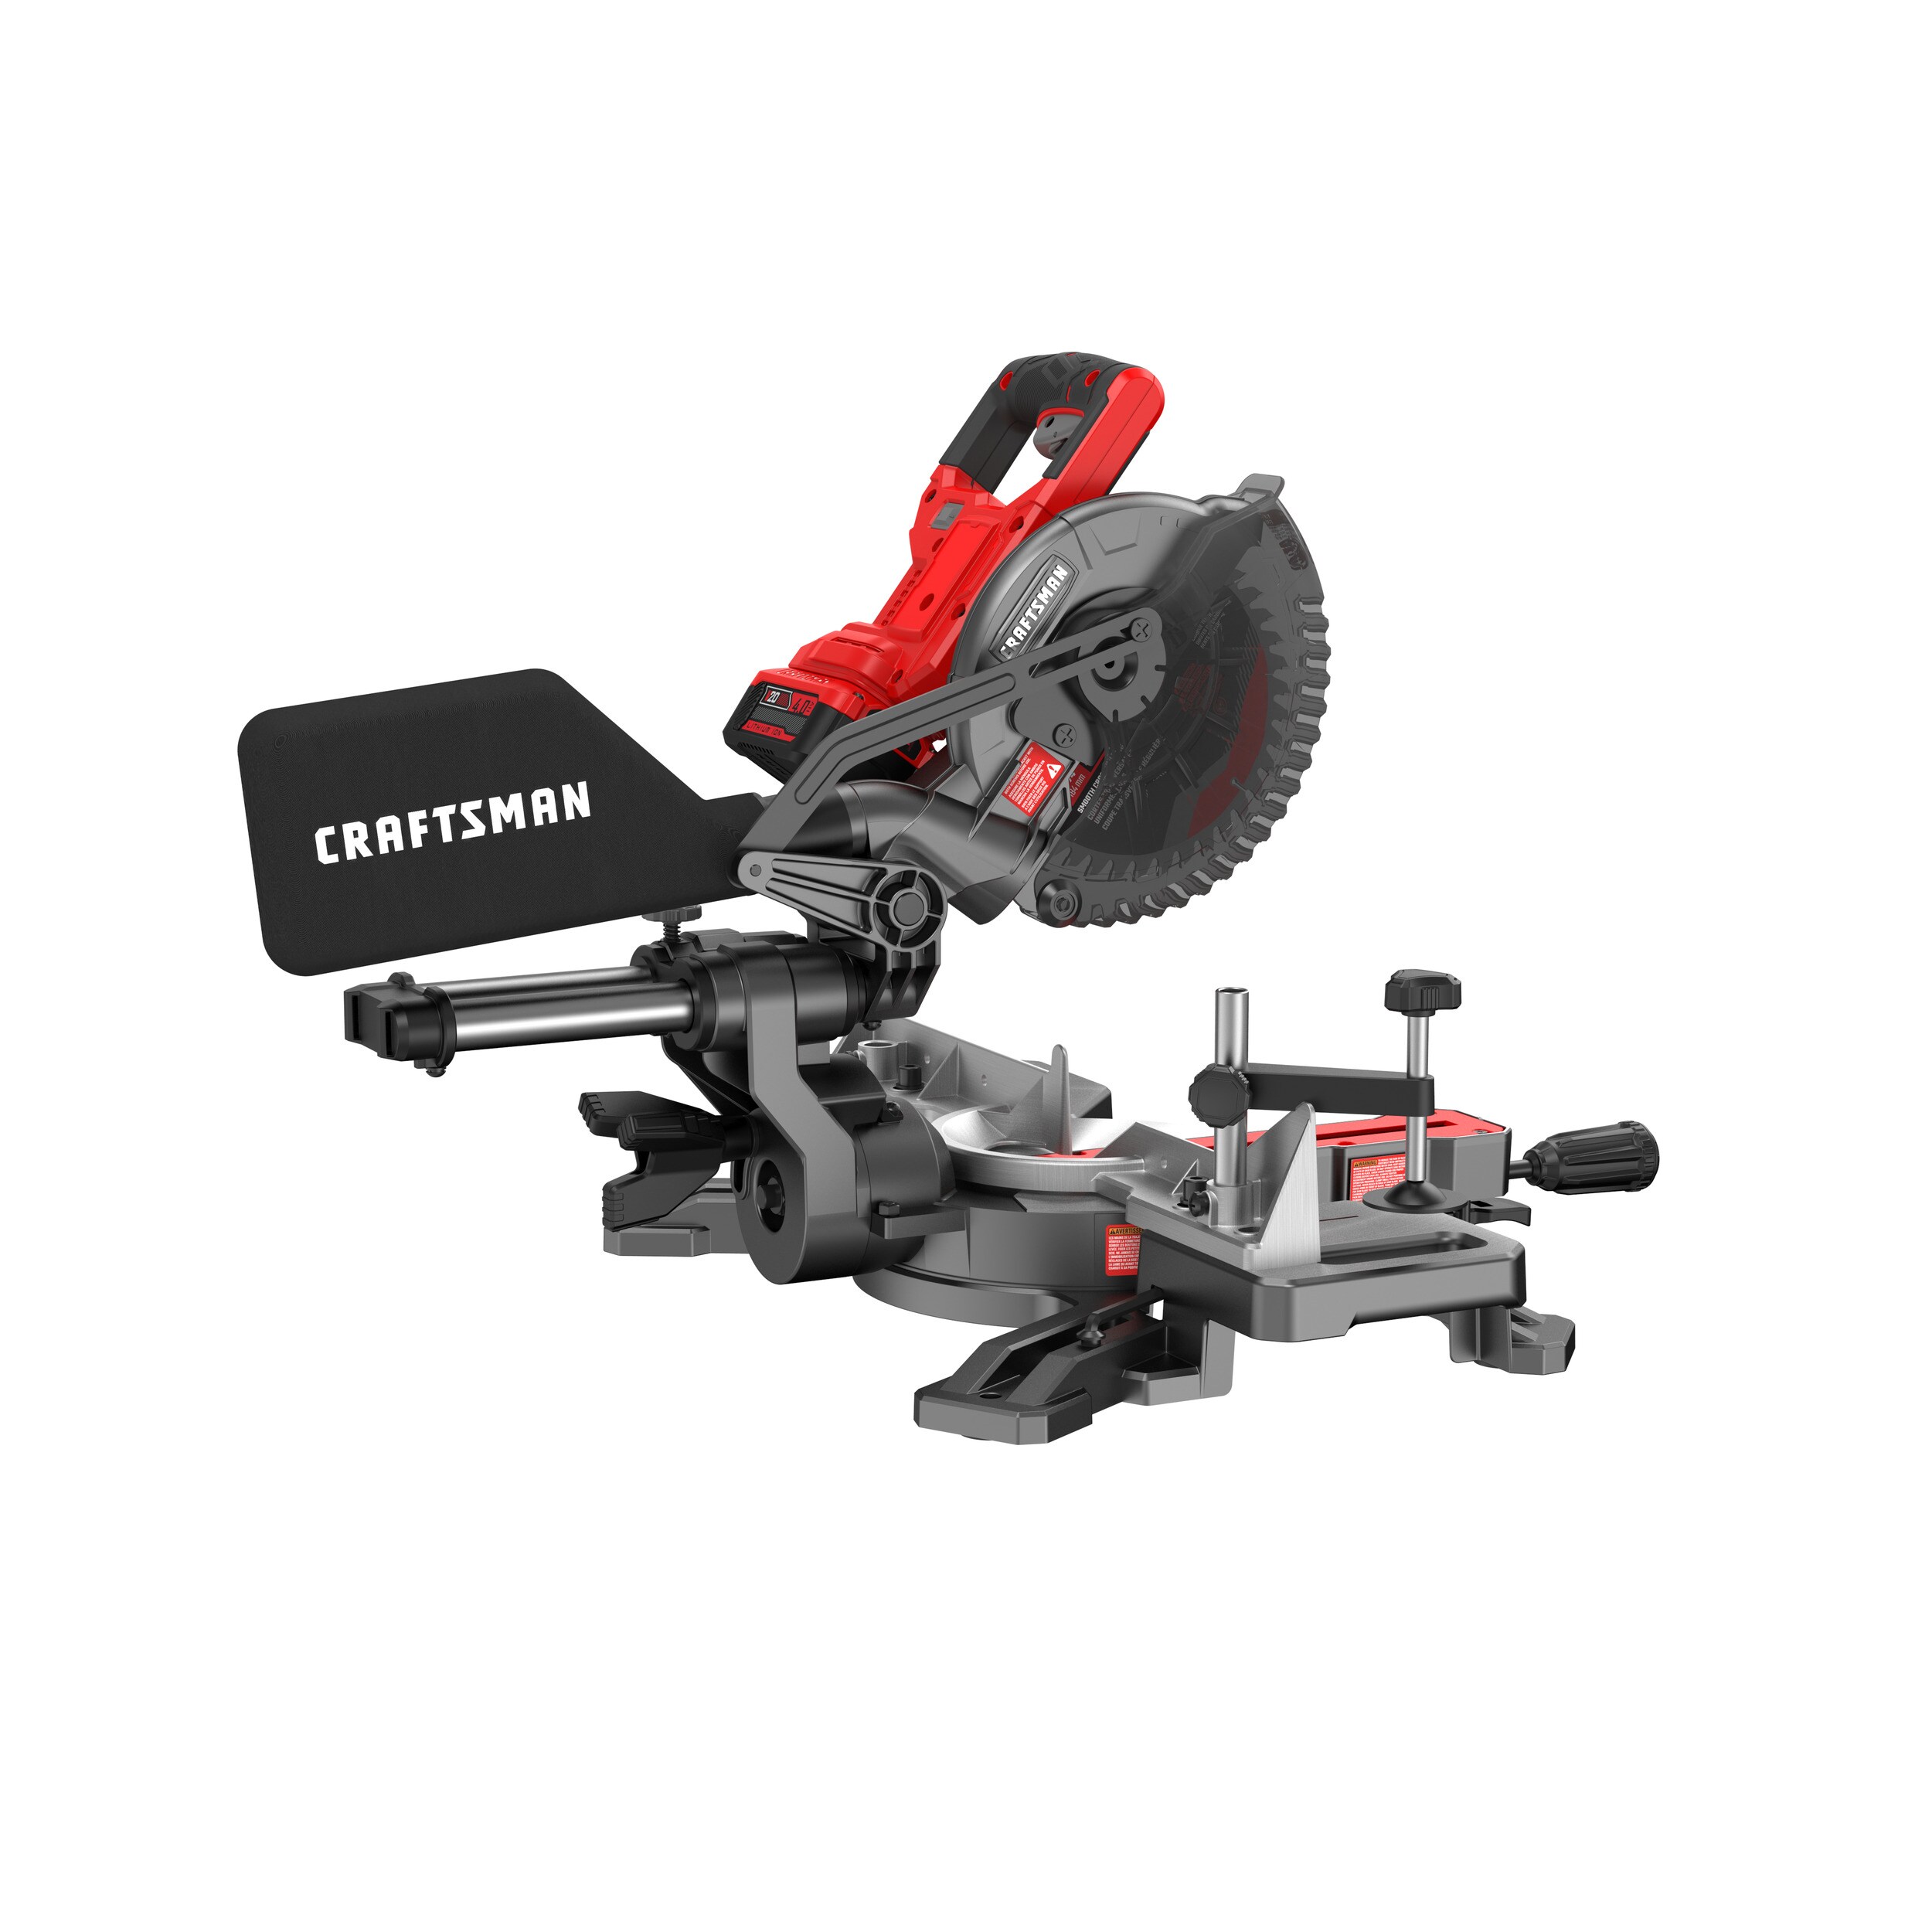 CRAFTSMAN V20 Miter Saw Kit, 7-1 inch, Cordless, Battery and Charger Included (CMCS714M1) - 1